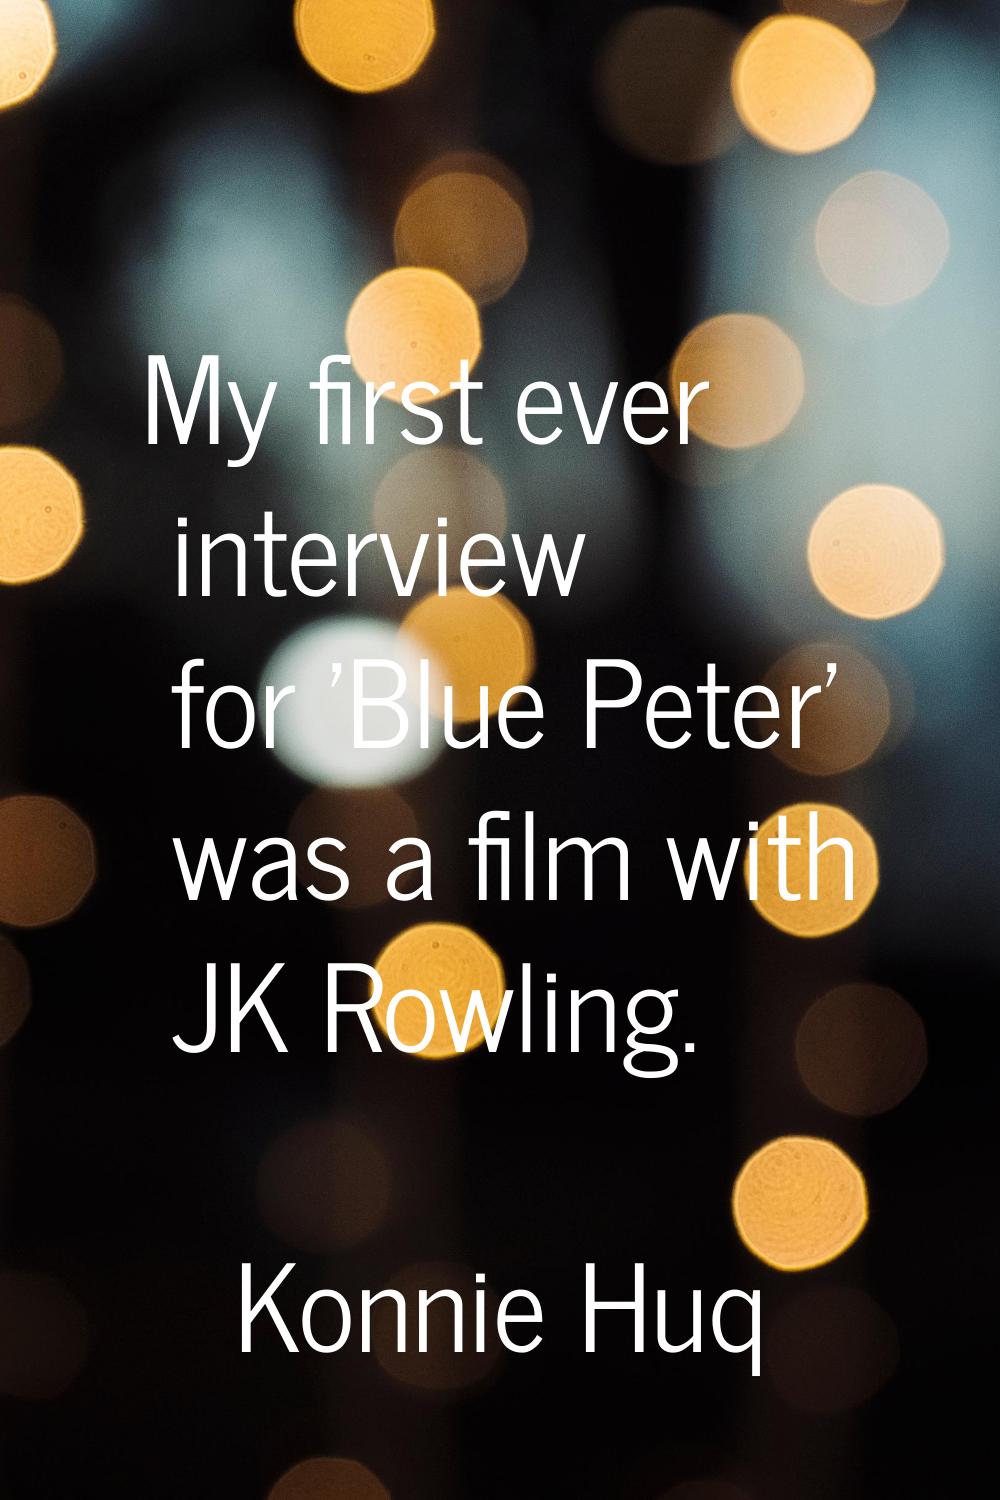 My first ever interview for 'Blue Peter' was a film with JK Rowling.